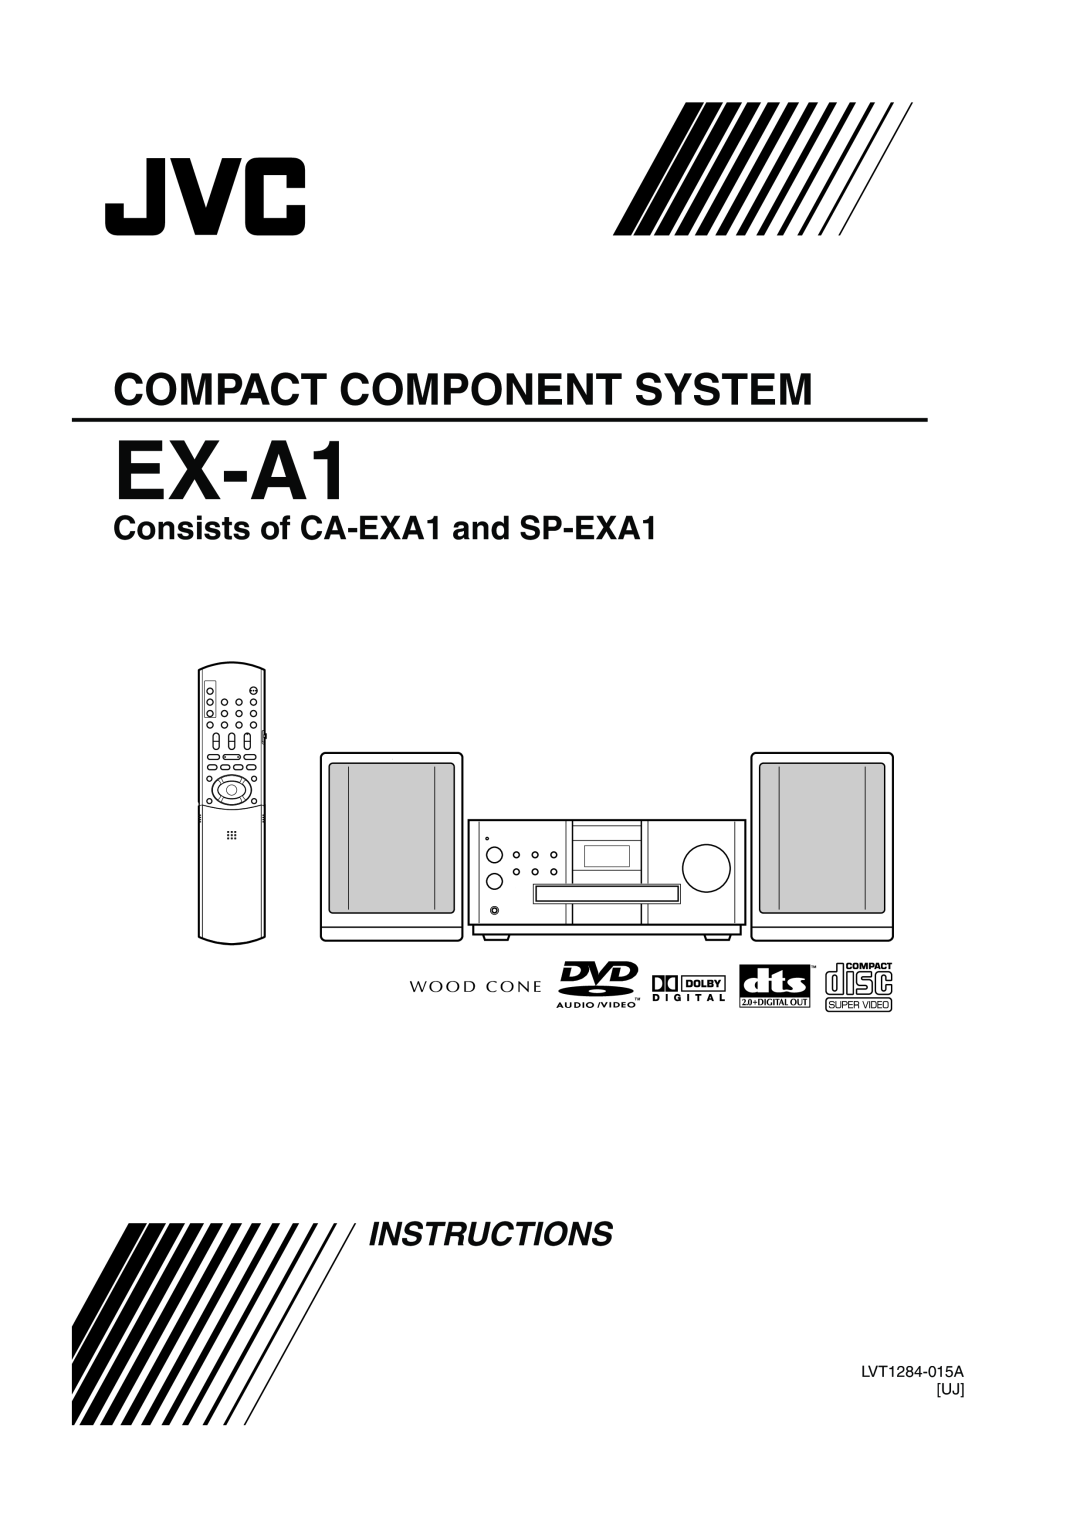 JVC EX-A1 manual Consists of CA-EXA1and SP-EXA1, Compact Component System, Instructions 